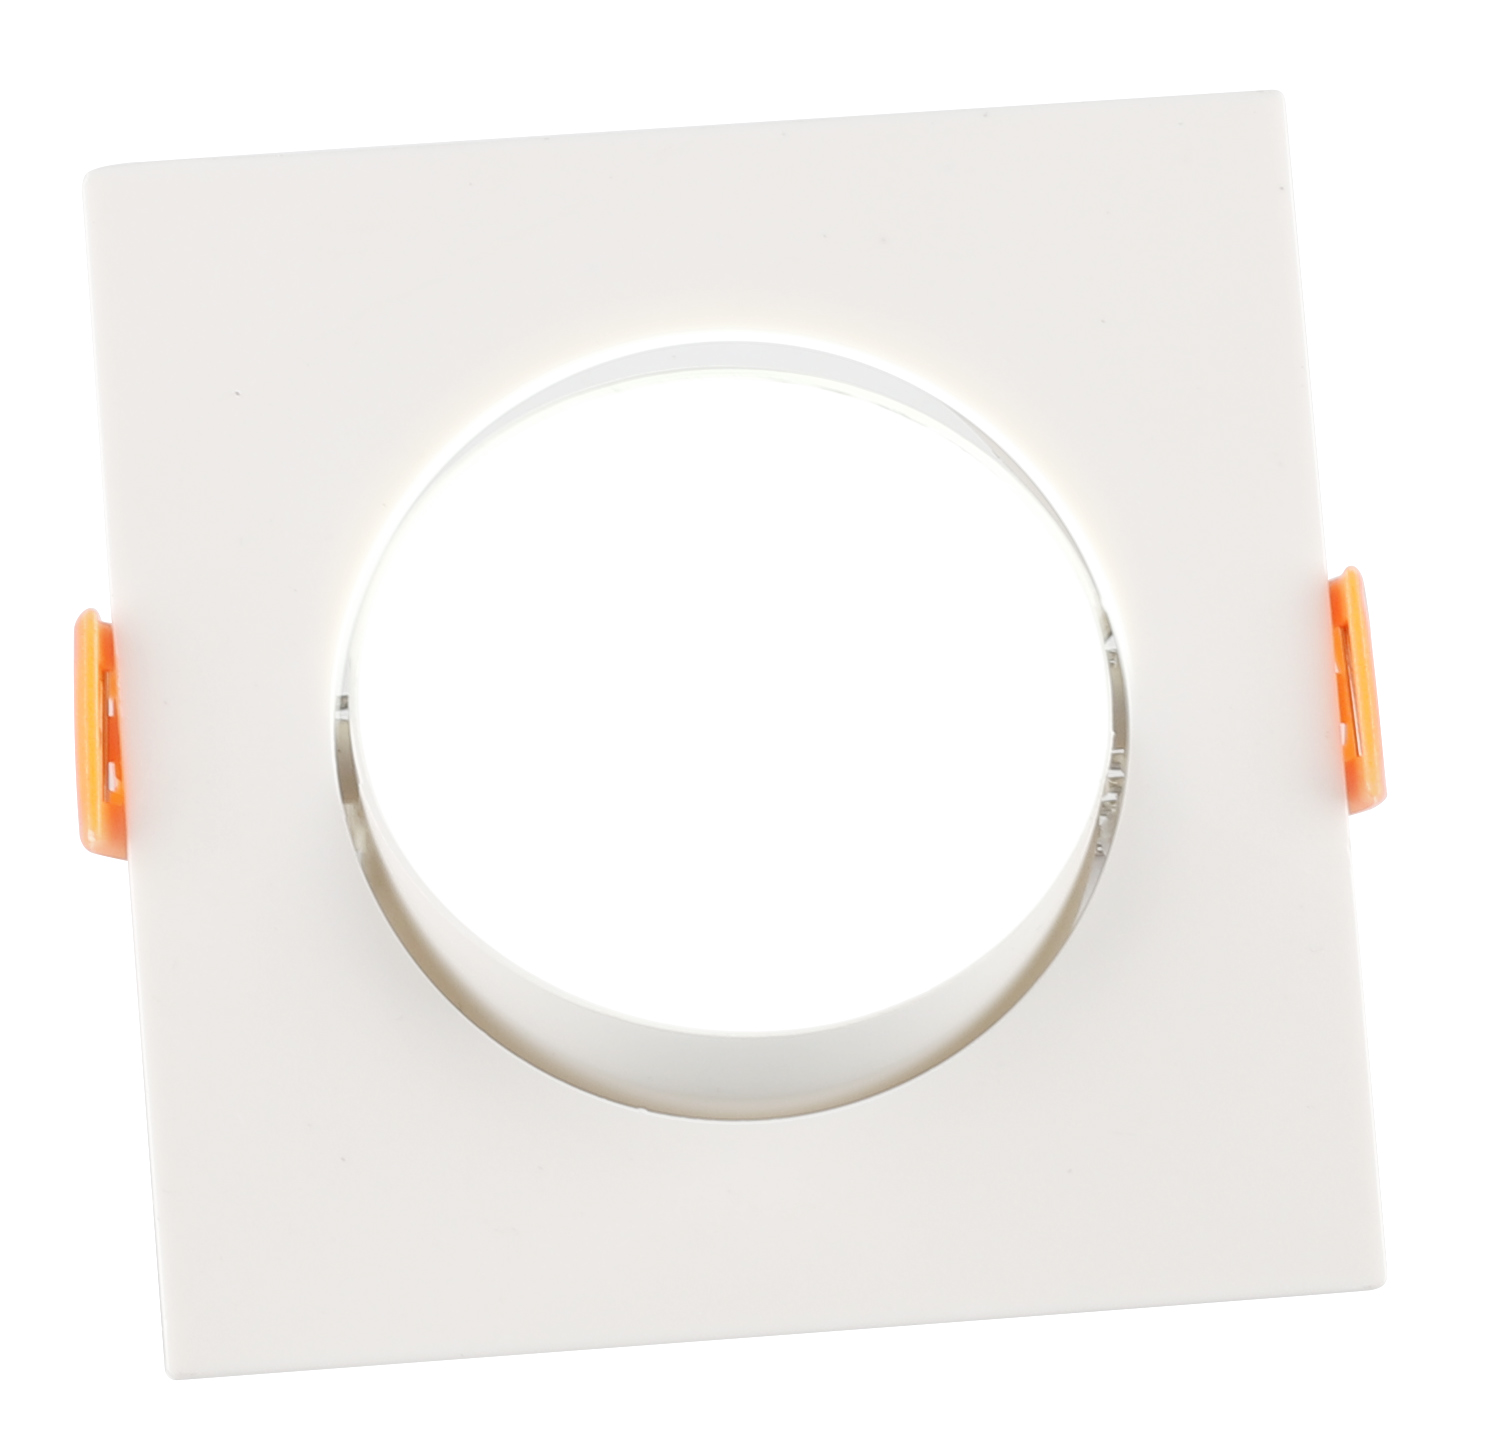 Hot Promotion Best-selling 3W 5W 7W 9W 12W Square Plastic Led Ceiling Light